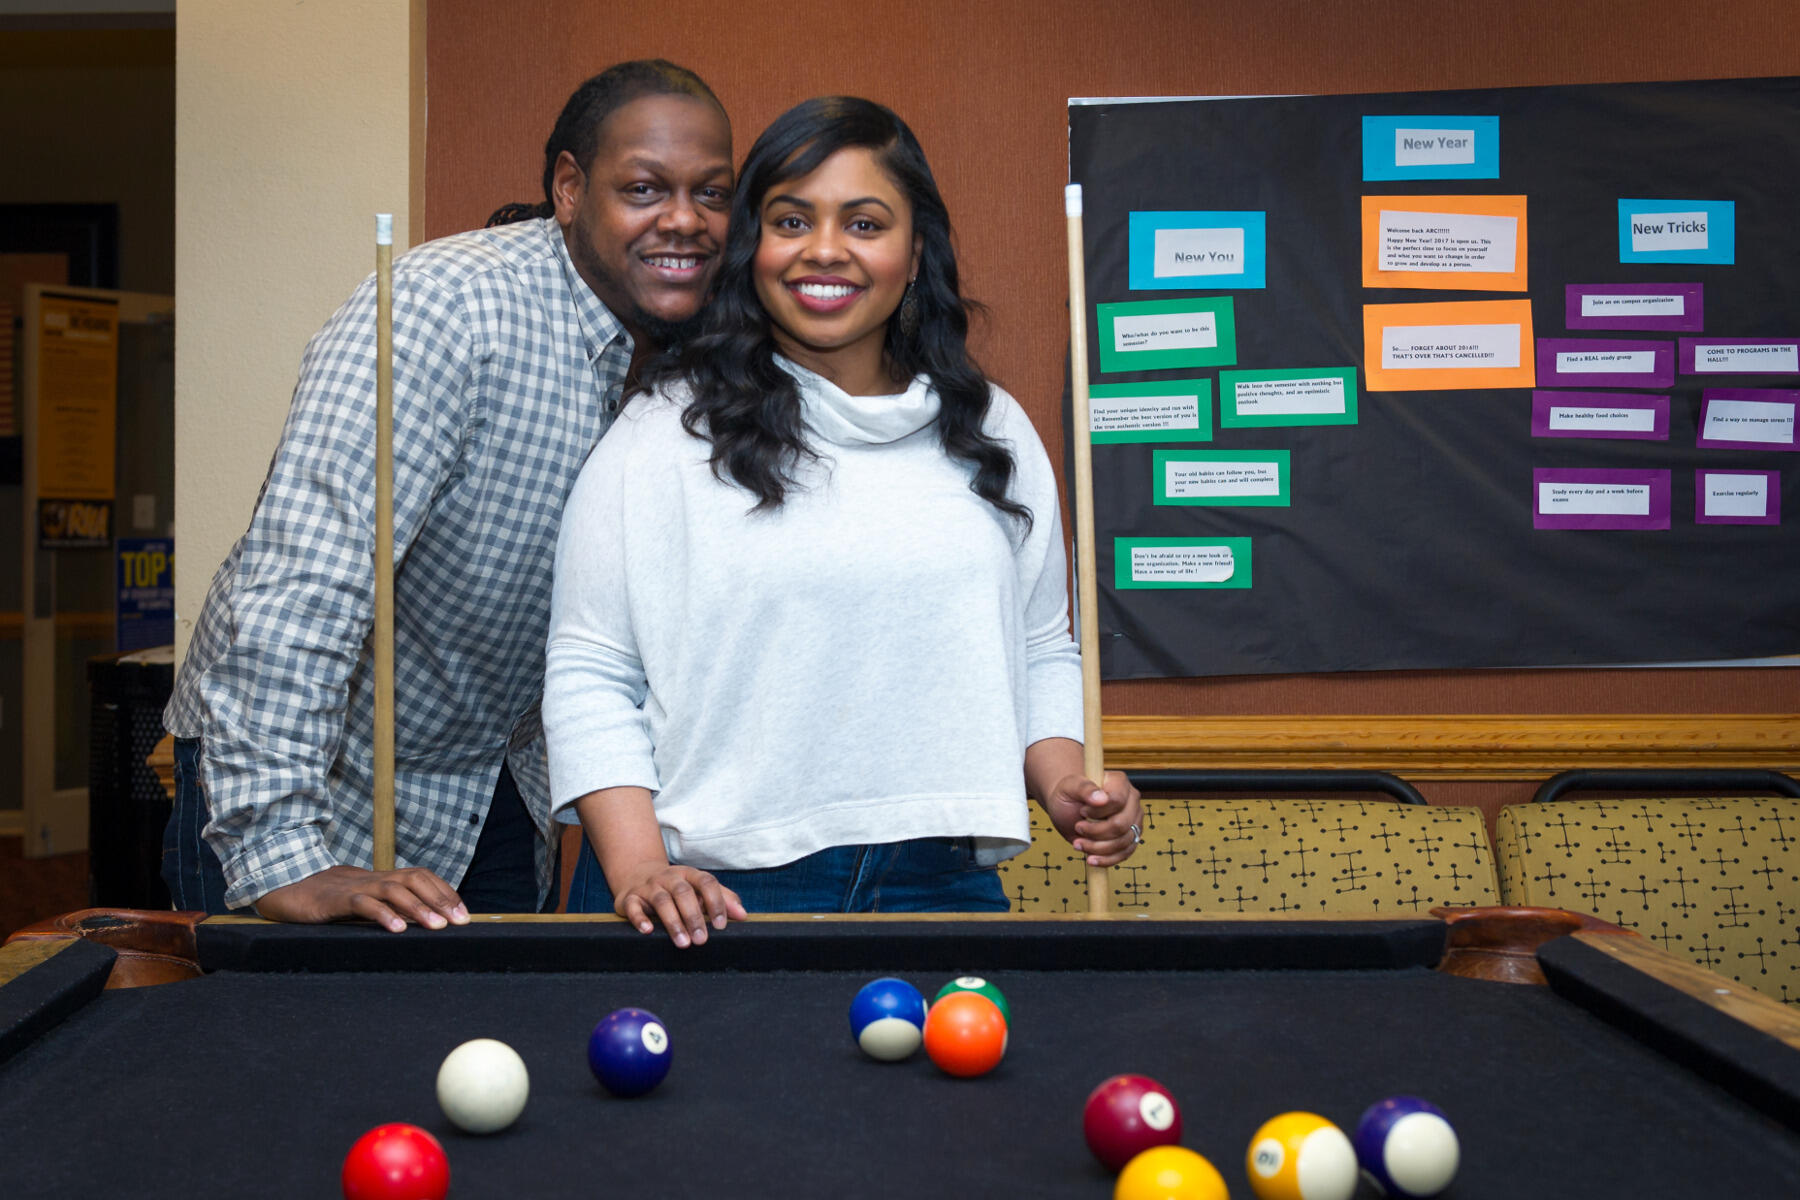 Dwayne and Tierney Jackson in the lounge area of Ackell Residence Center (known as West Broad Apartments when they lived there), where according to Tierney, “Dwayne put the moves on me during a game of pool.” 